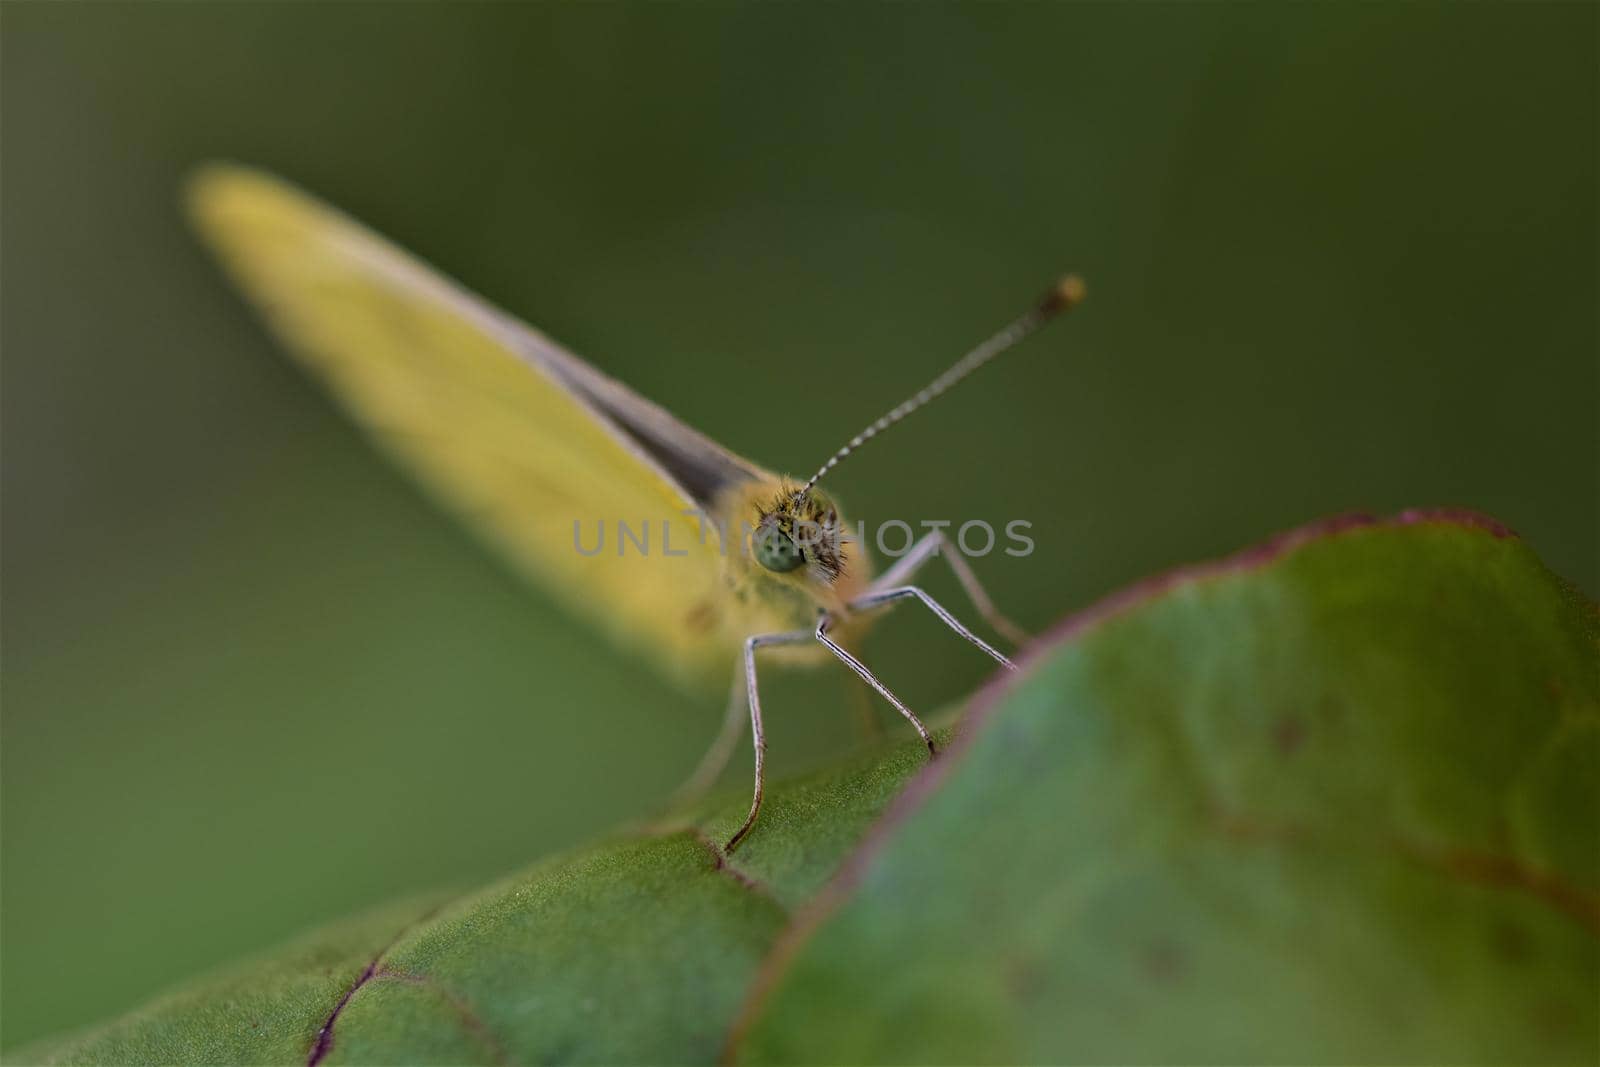 Pieris rapae - cabbage white butterfly on a beetroot leaf as a close up by Luise123